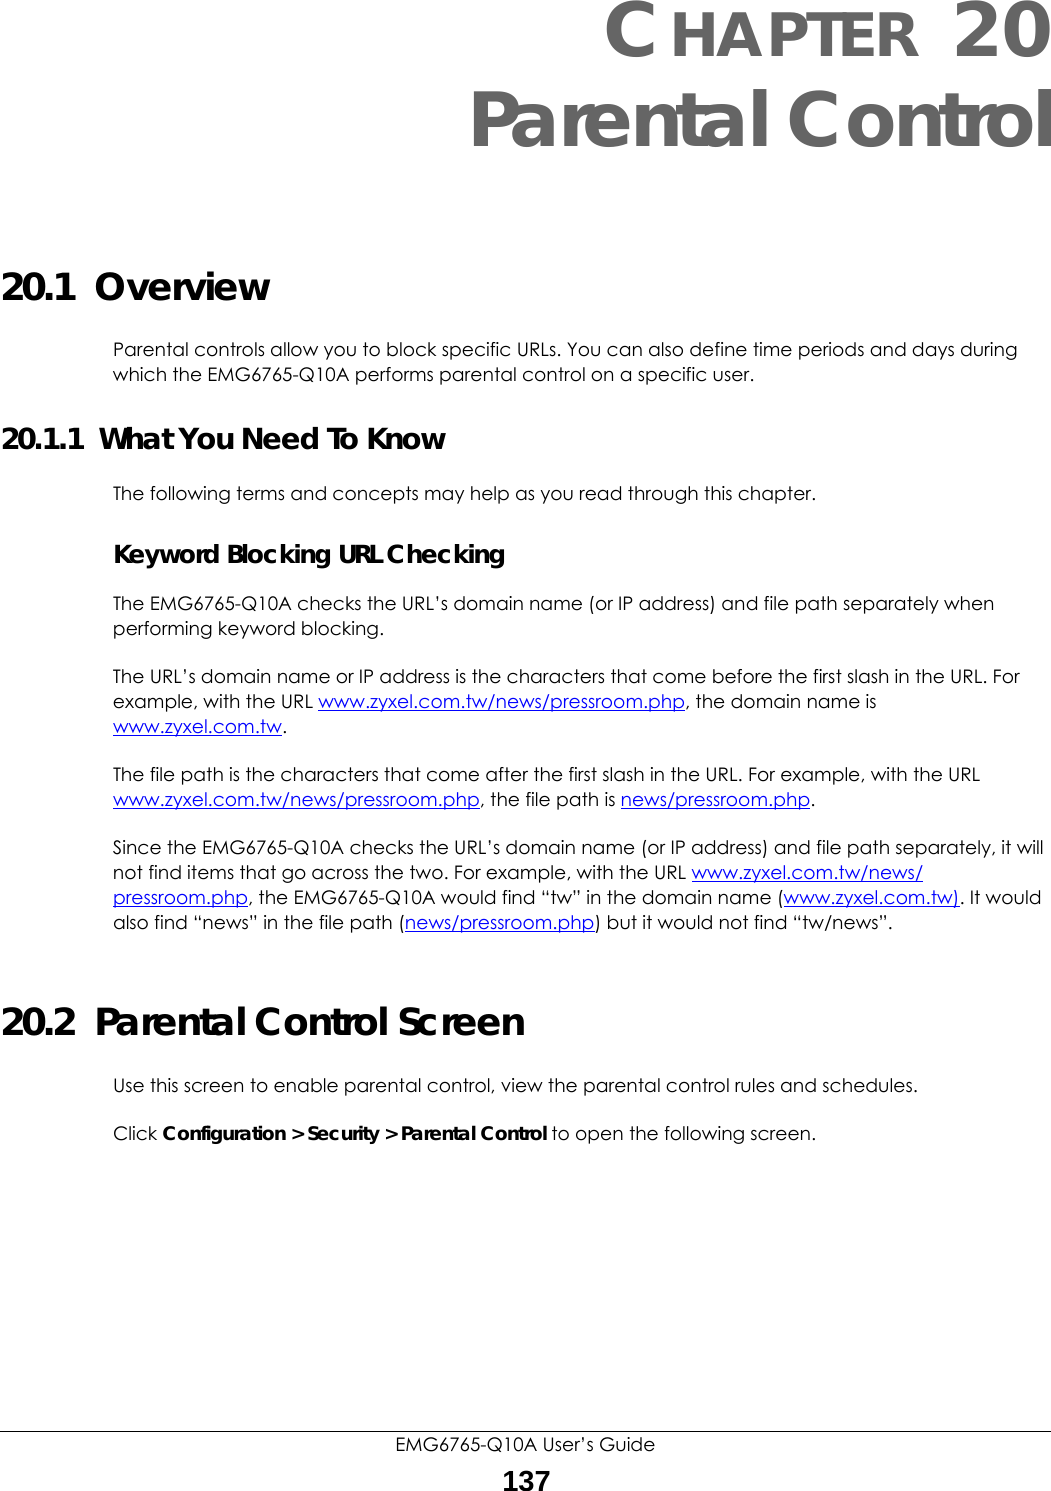 EMG6765-Q10A User’s Guide137CHAPTER 20Parental Control20.1  OverviewParental controls allow you to block specific URLs. You can also define time periods and days during which the EMG6765-Q10A performs parental control on a specific user. 20.1.1  What You Need To KnowThe following terms and concepts may help as you read through this chapter.Keyword Blocking URL CheckingThe EMG6765-Q10A checks the URL’s domain name (or IP address) and file path separately when performing keyword blocking. The URL’s domain name or IP address is the characters that come before the first slash in the URL. For example, with the URL www.zyxel.com.tw/news/pressroom.php, the domain name is www.zyxel.com.tw.The file path is the characters that come after the first slash in the URL. For example, with the URL www.zyxel.com.tw/news/pressroom.php, the file path is news/pressroom.php.Since the EMG6765-Q10A checks the URL’s domain name (or IP address) and file path separately, it will not find items that go across the two. For example, with the URL www.zyxel.com.tw/news/pressroom.php, the EMG6765-Q10A would find “tw” in the domain name (www.zyxel.com.tw). It would also find “news” in the file path (news/pressroom.php) but it would not find “tw/news”.20.2  Parental Control ScreenUse this screen to enable parental control, view the parental control rules and schedules.Click Configuration &gt; Security &gt; Parental Control to open the following screen. 